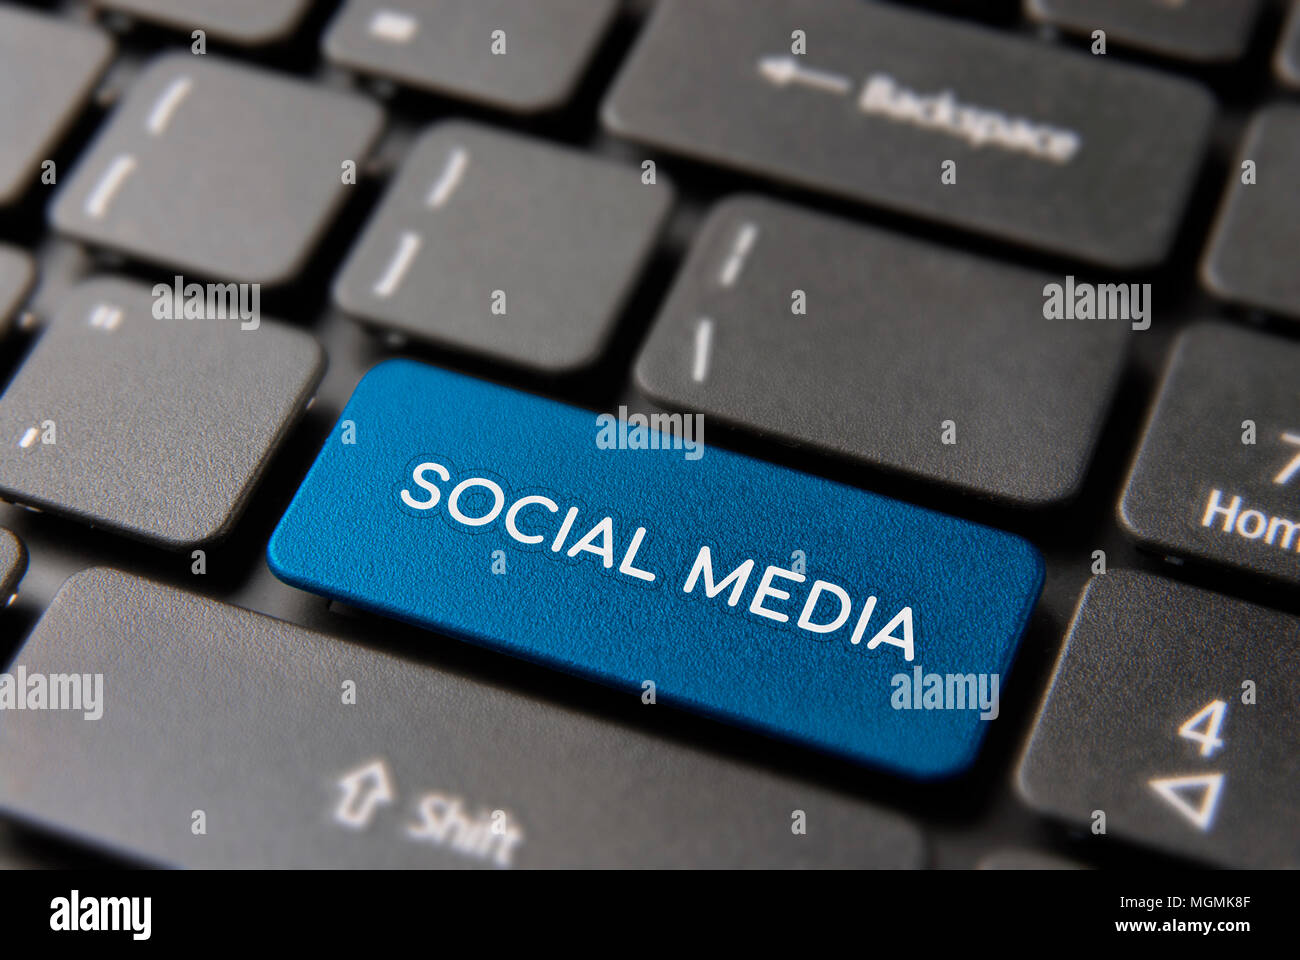 Social media keyboard button for community web concept. Online network key closeup in blue color. Stock Photo